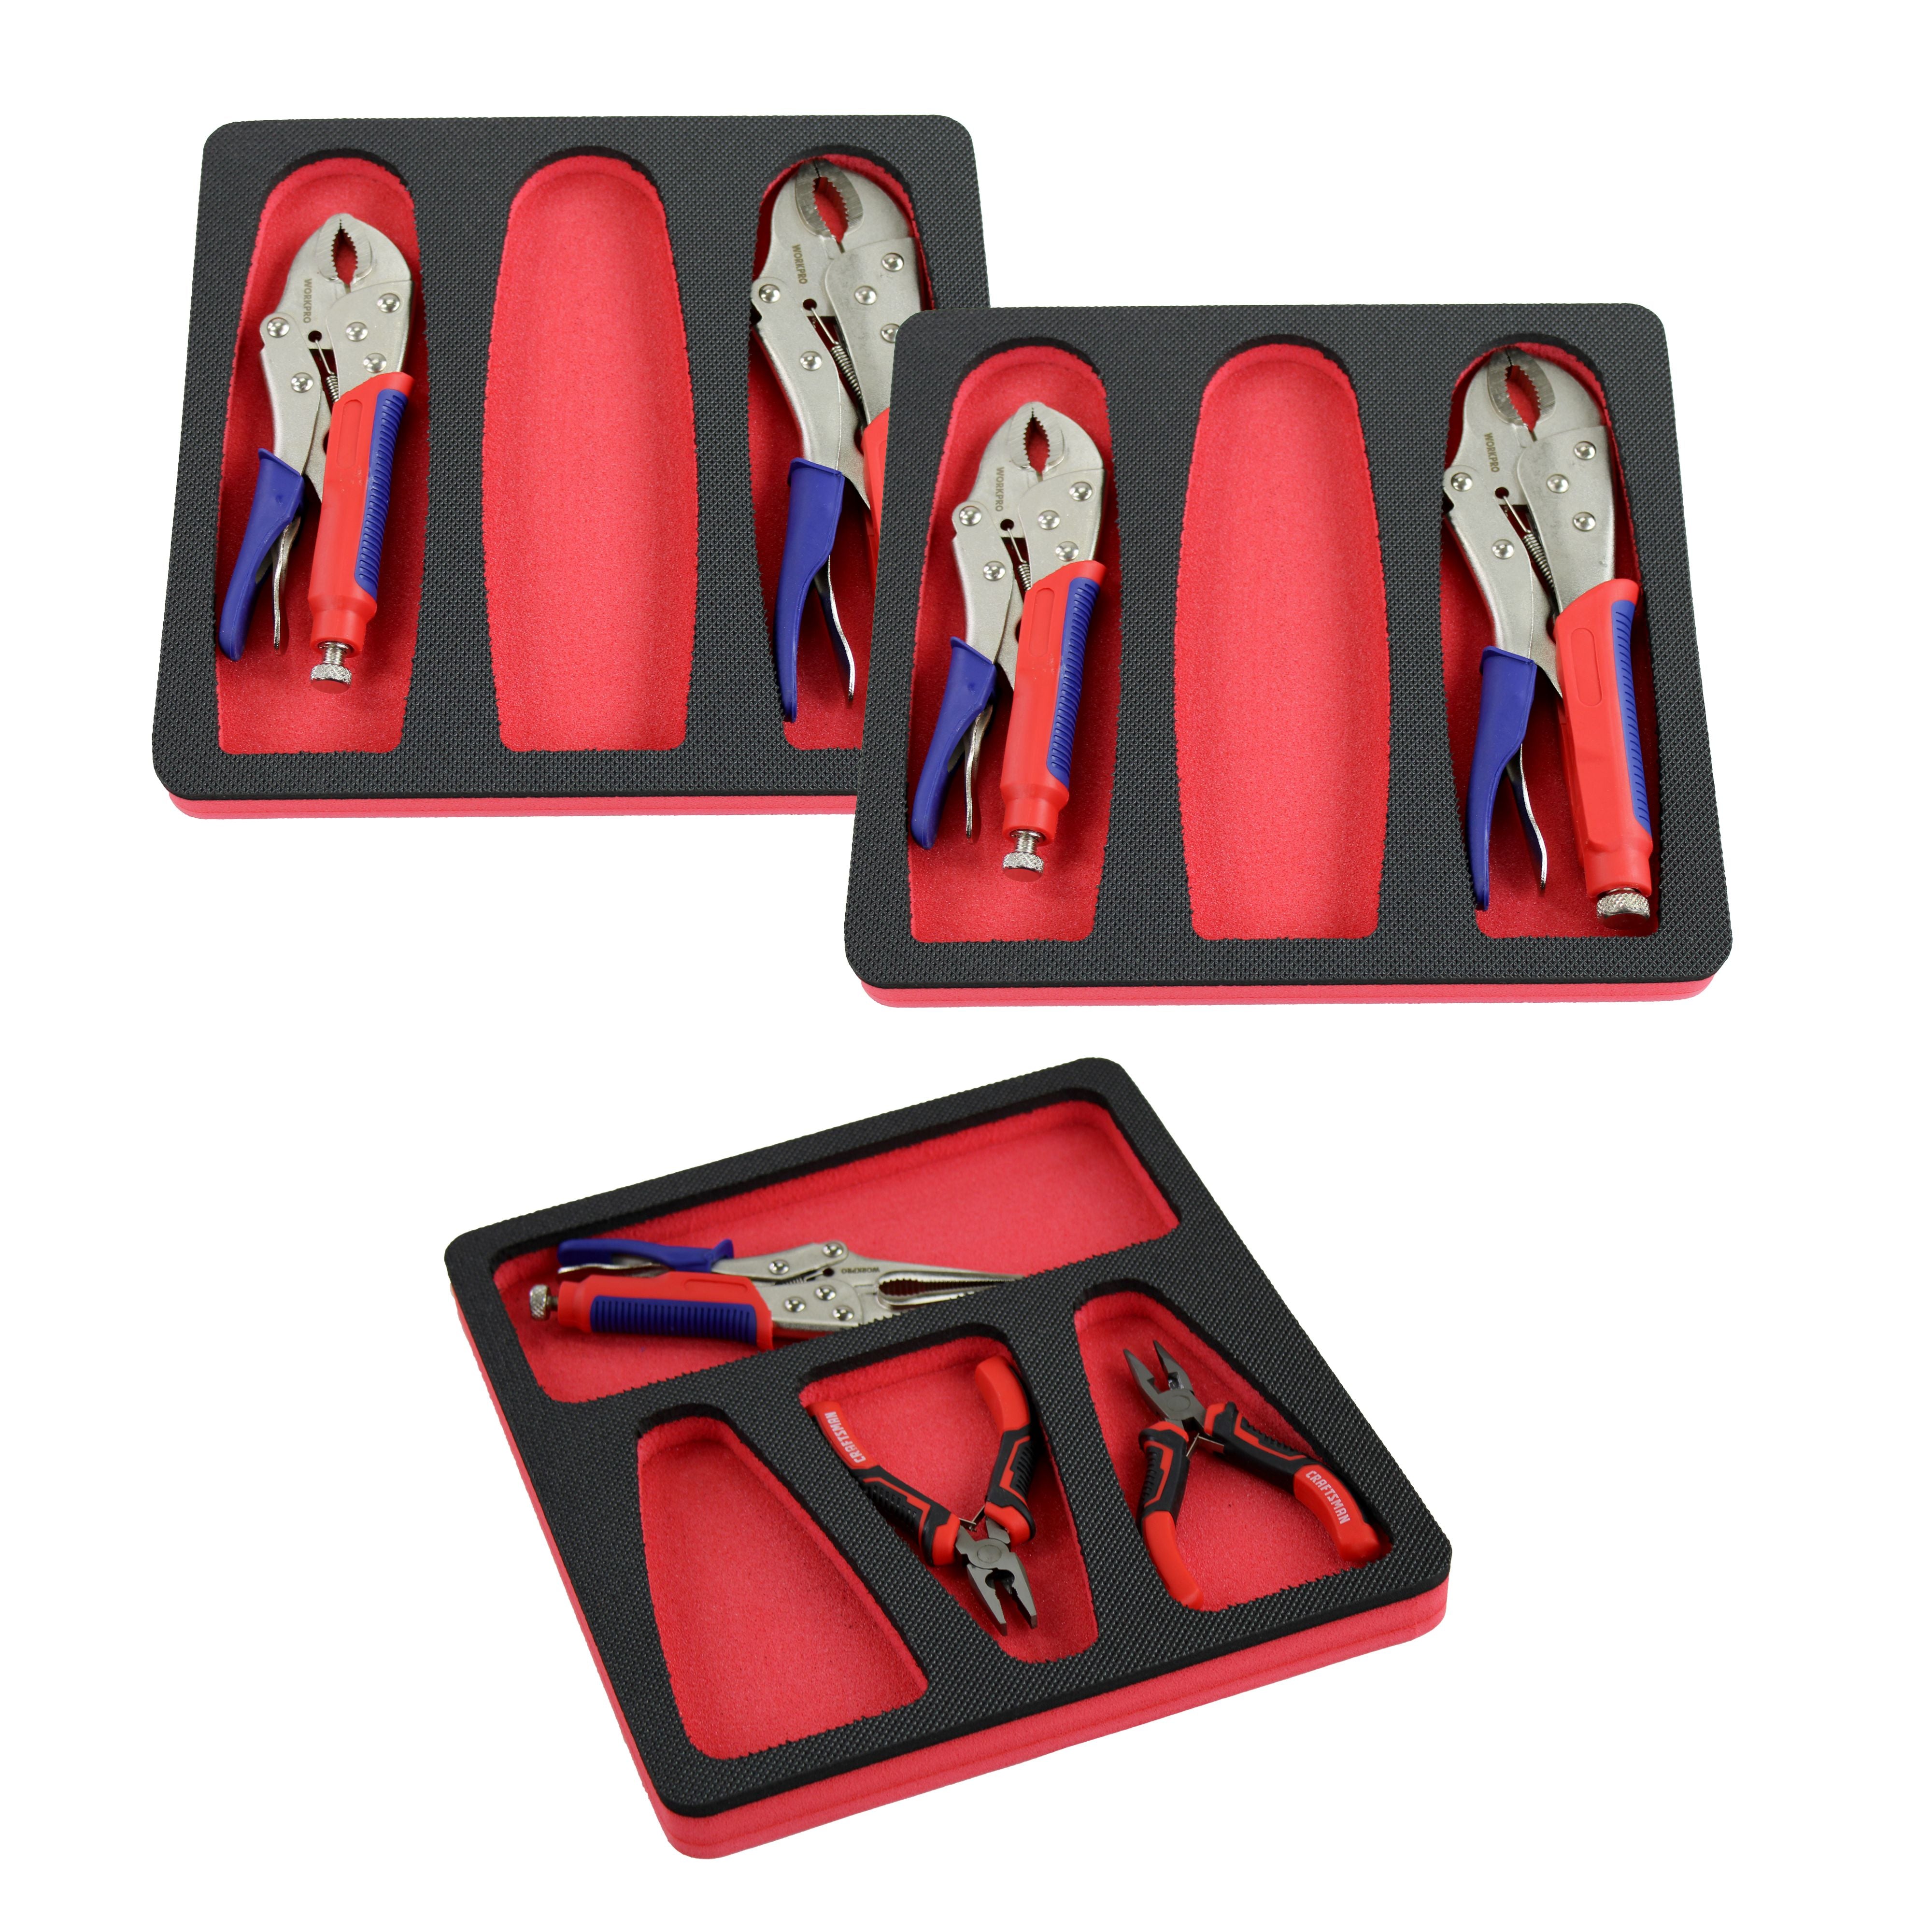 Tool Drawer Organizer Small Pliers Holder Insert Red and Black Durable –